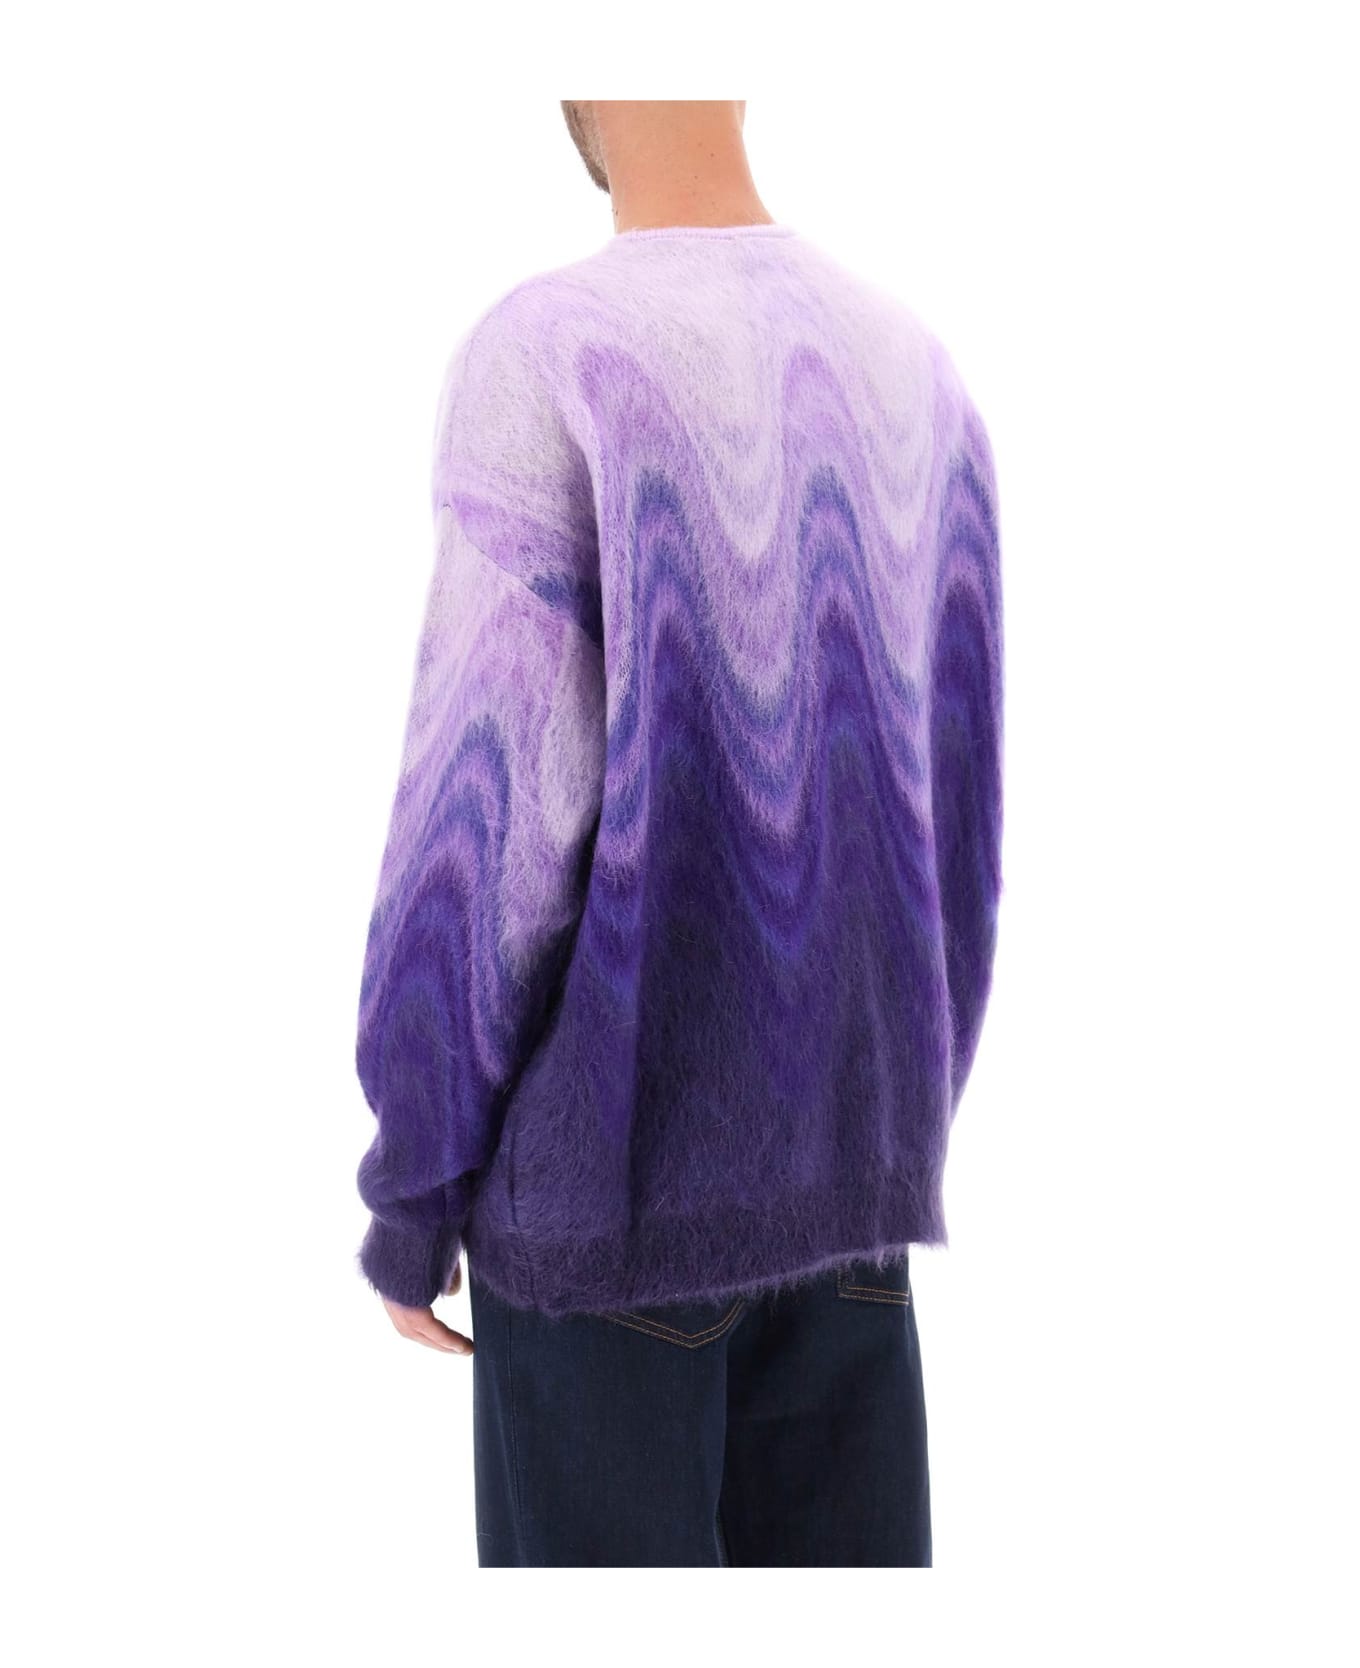 Etro Sweater In Gradient Brushed Mohair Wool - Purple